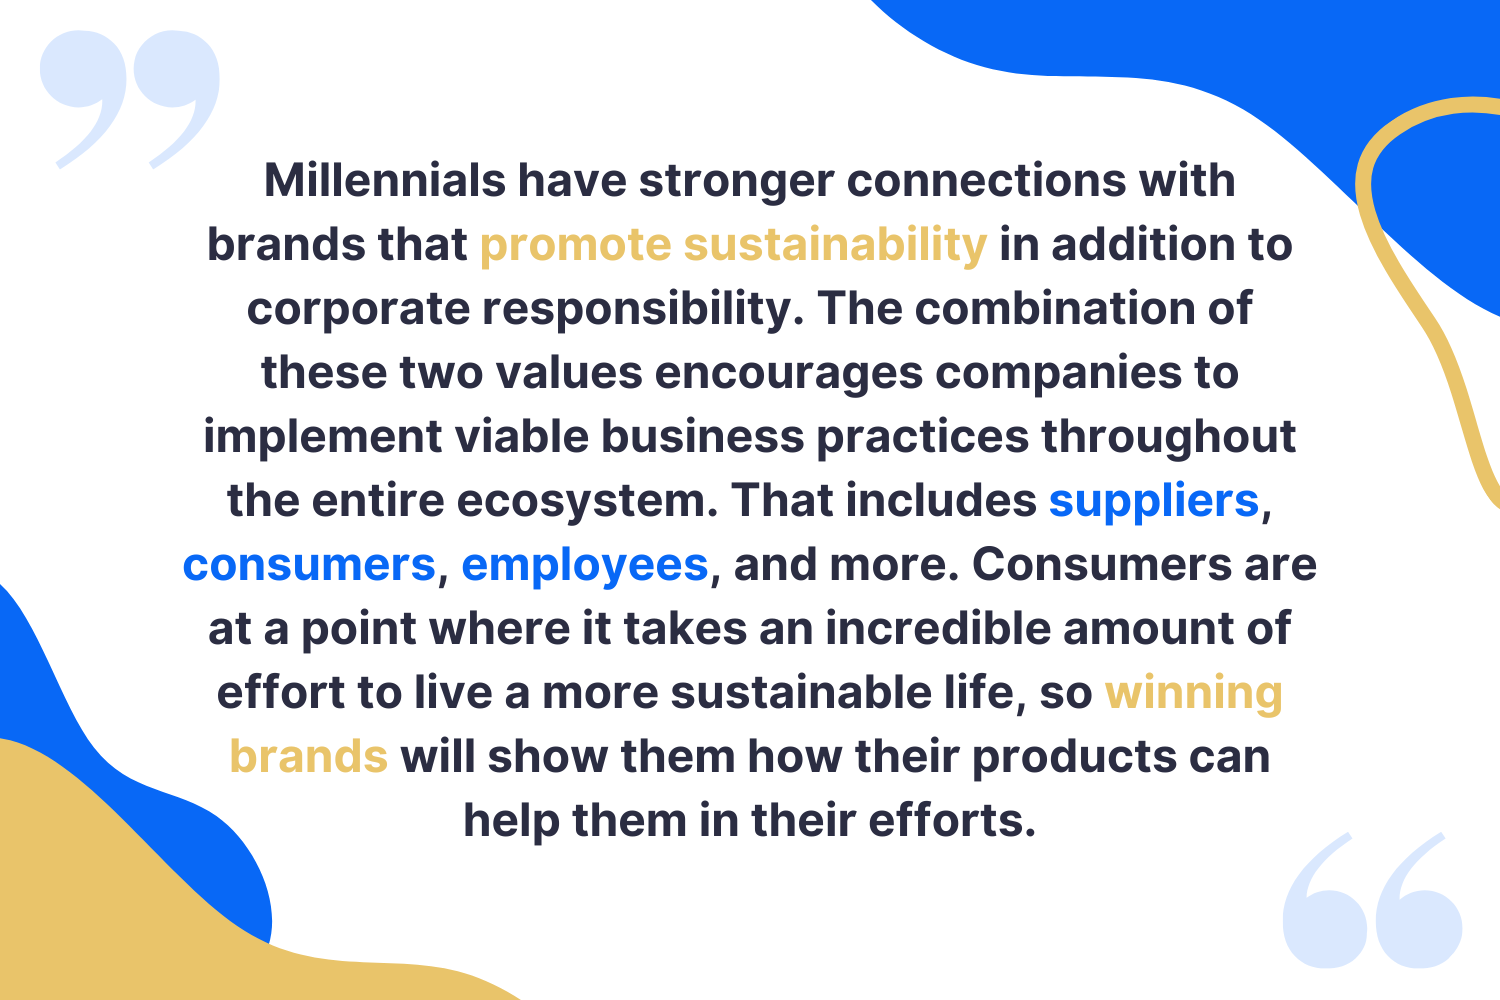 Millennials in workplace have stronger connections with brands that promote sustainability